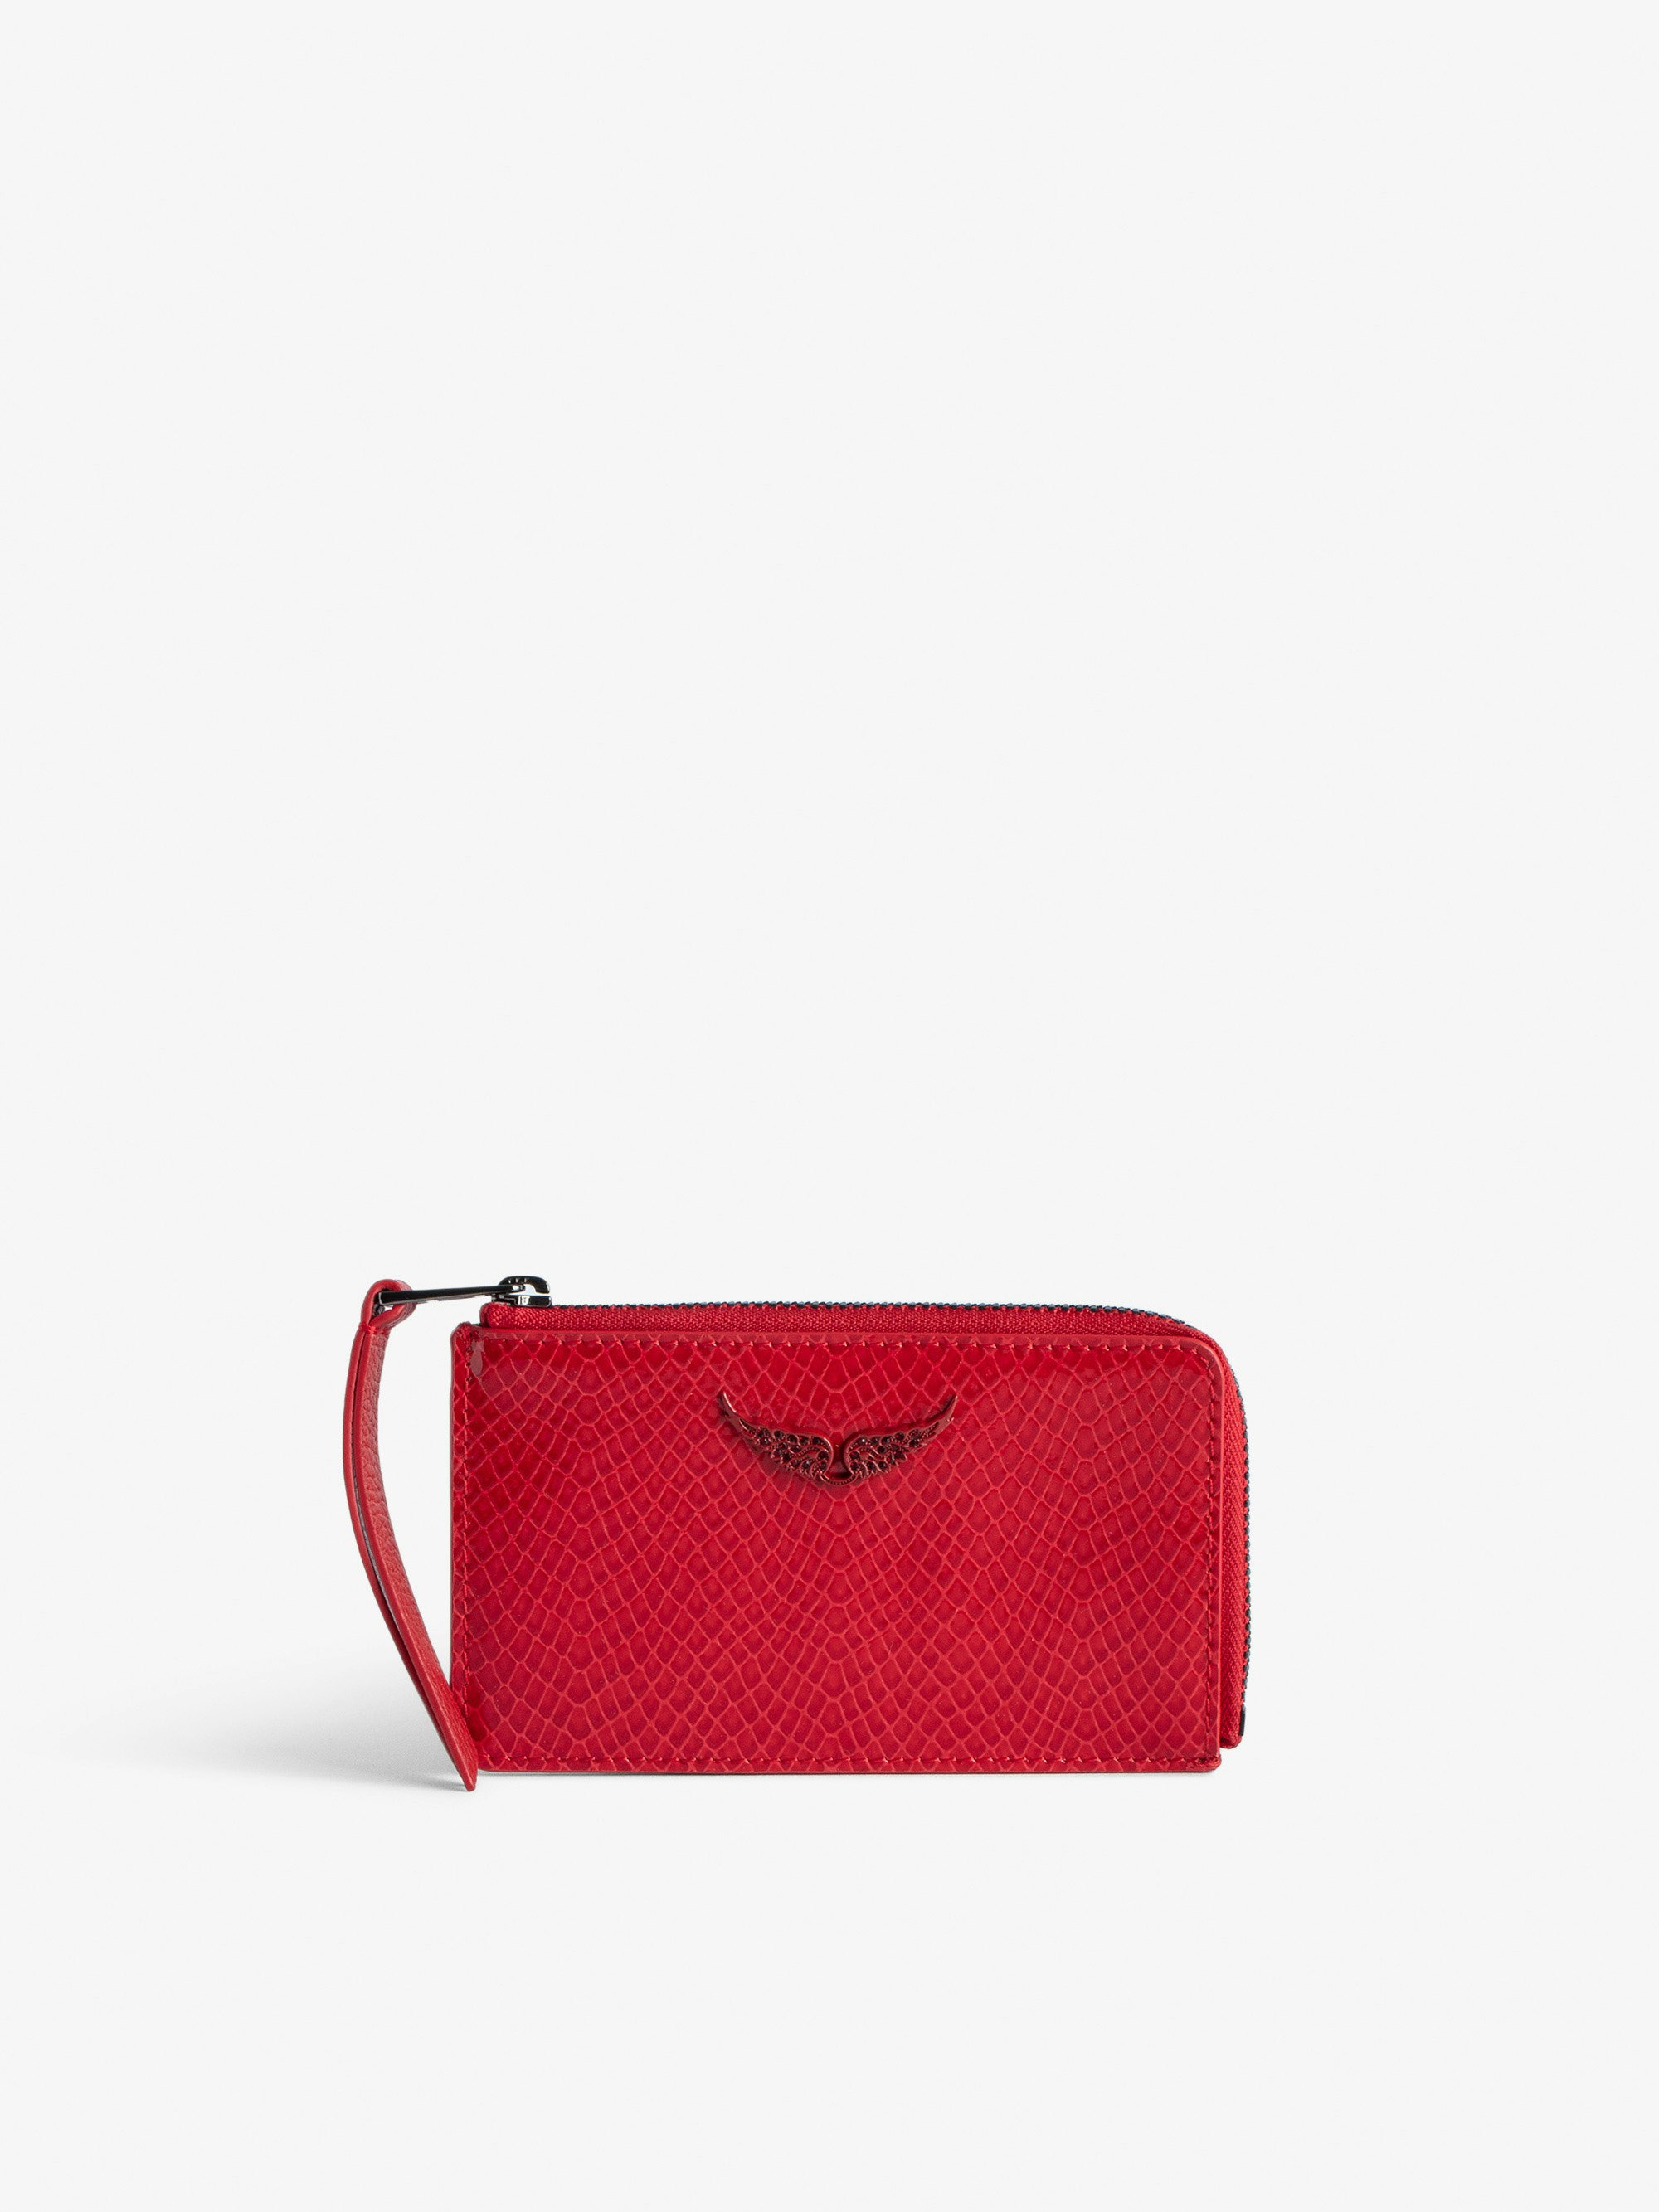 ZV Card Embossed Card Holder - Women’s red python-effect patent leather card holder with wings charm.